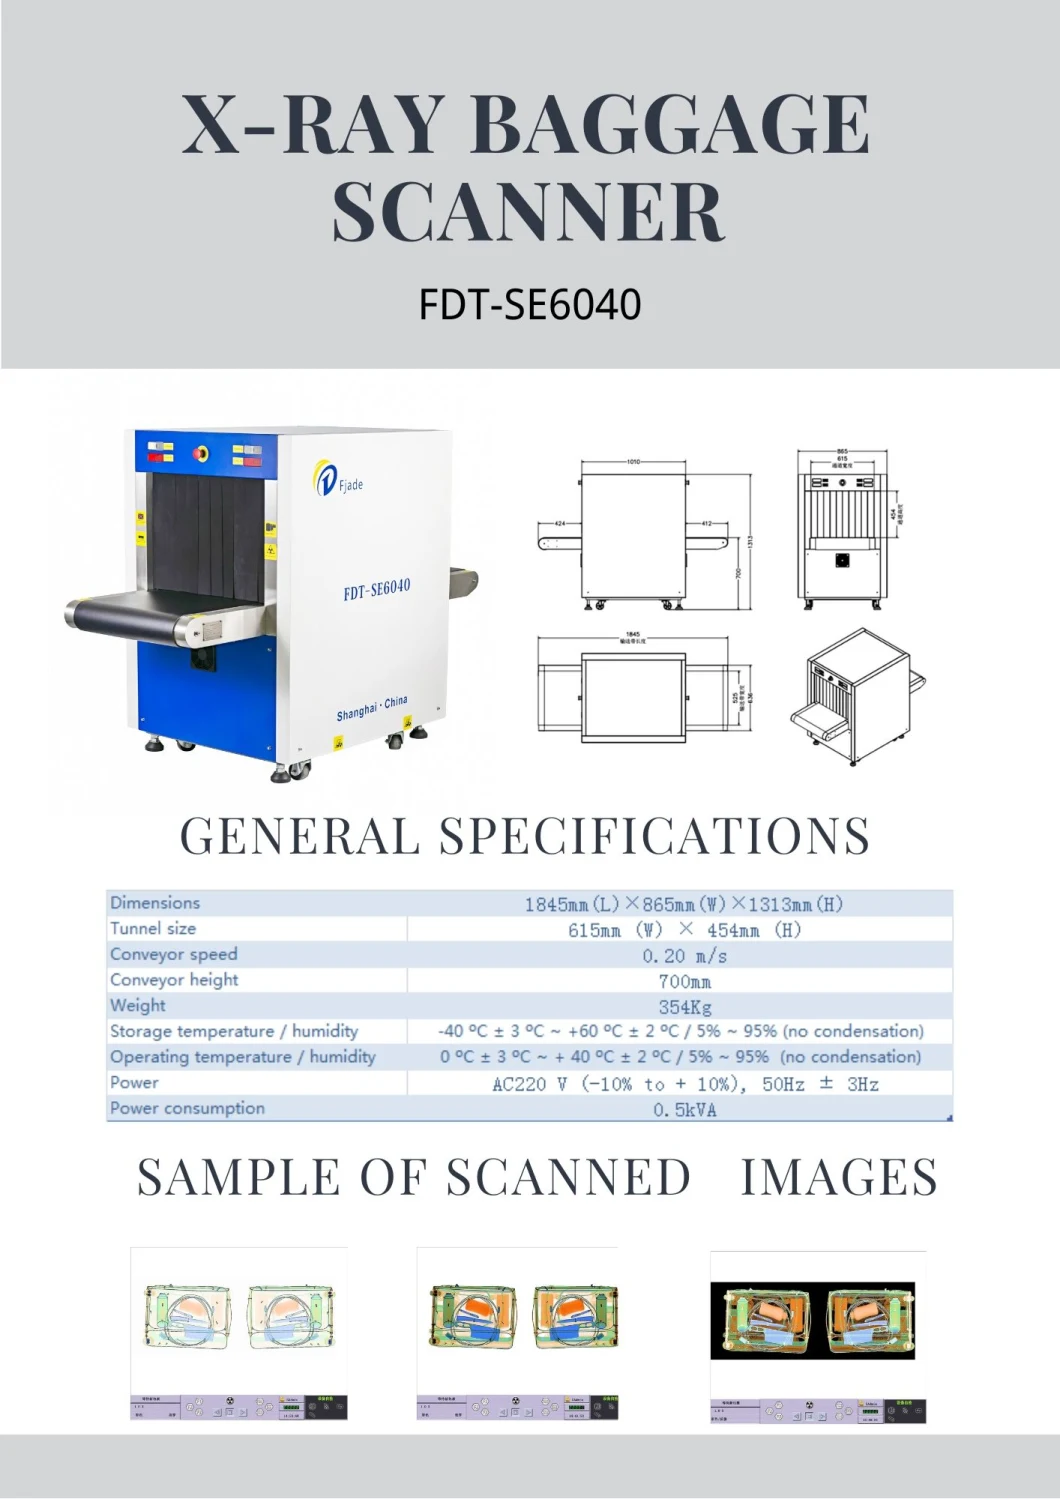 Baggage Scanner Can Convey 100 Kg Maximum Load.